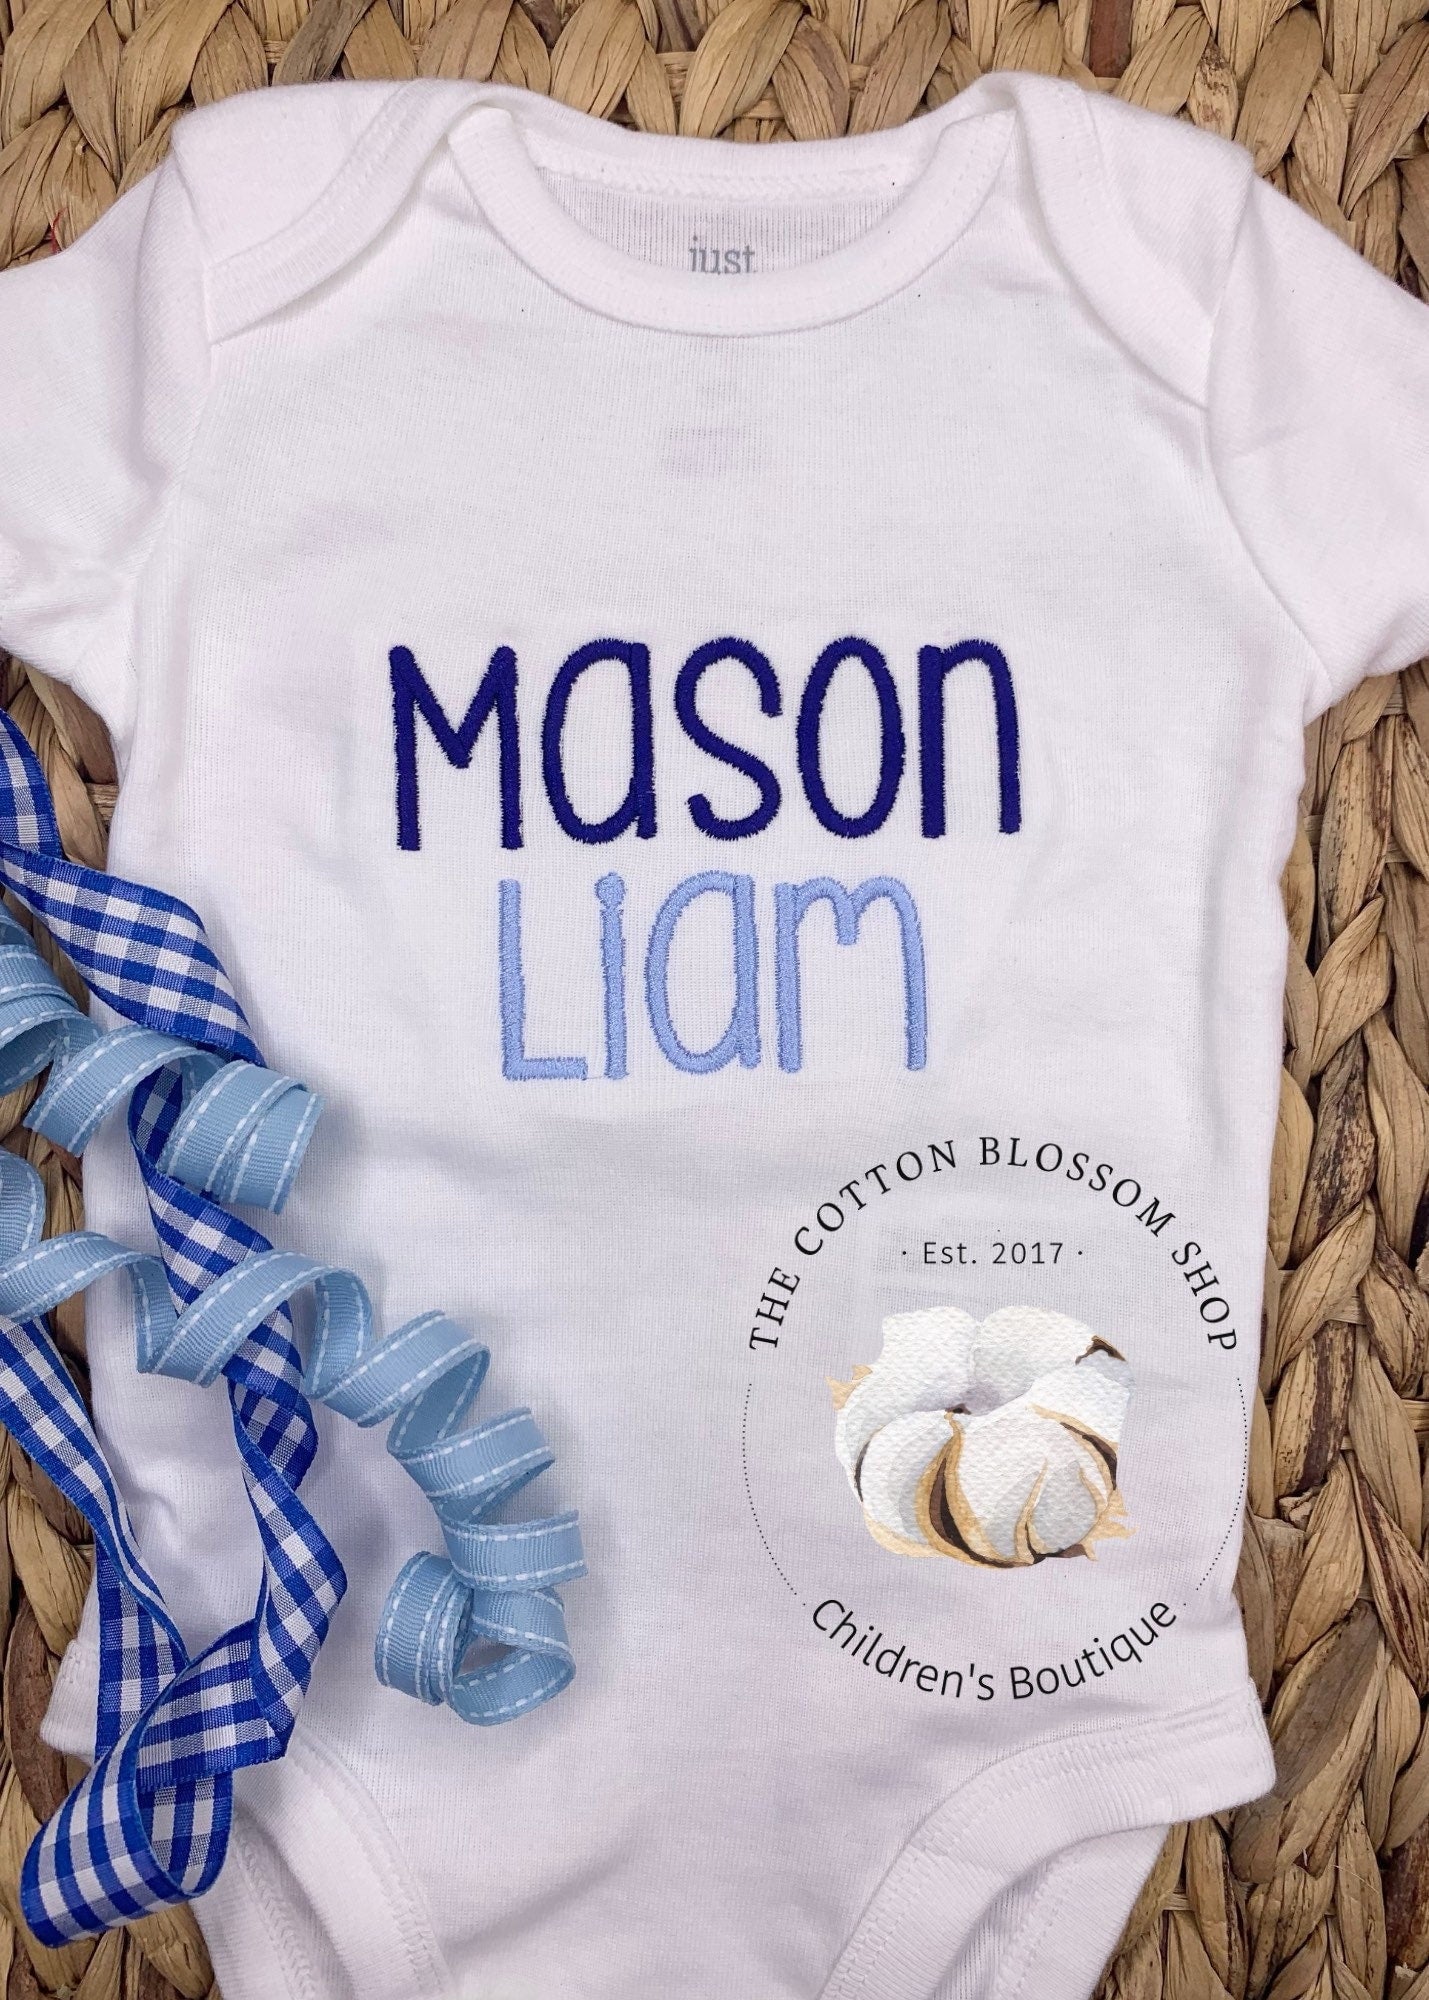 Baby Boys Coming home outfit, monogrammed shirt, big brother shirt, personalized name shirt, baby shower gift, first day shirt